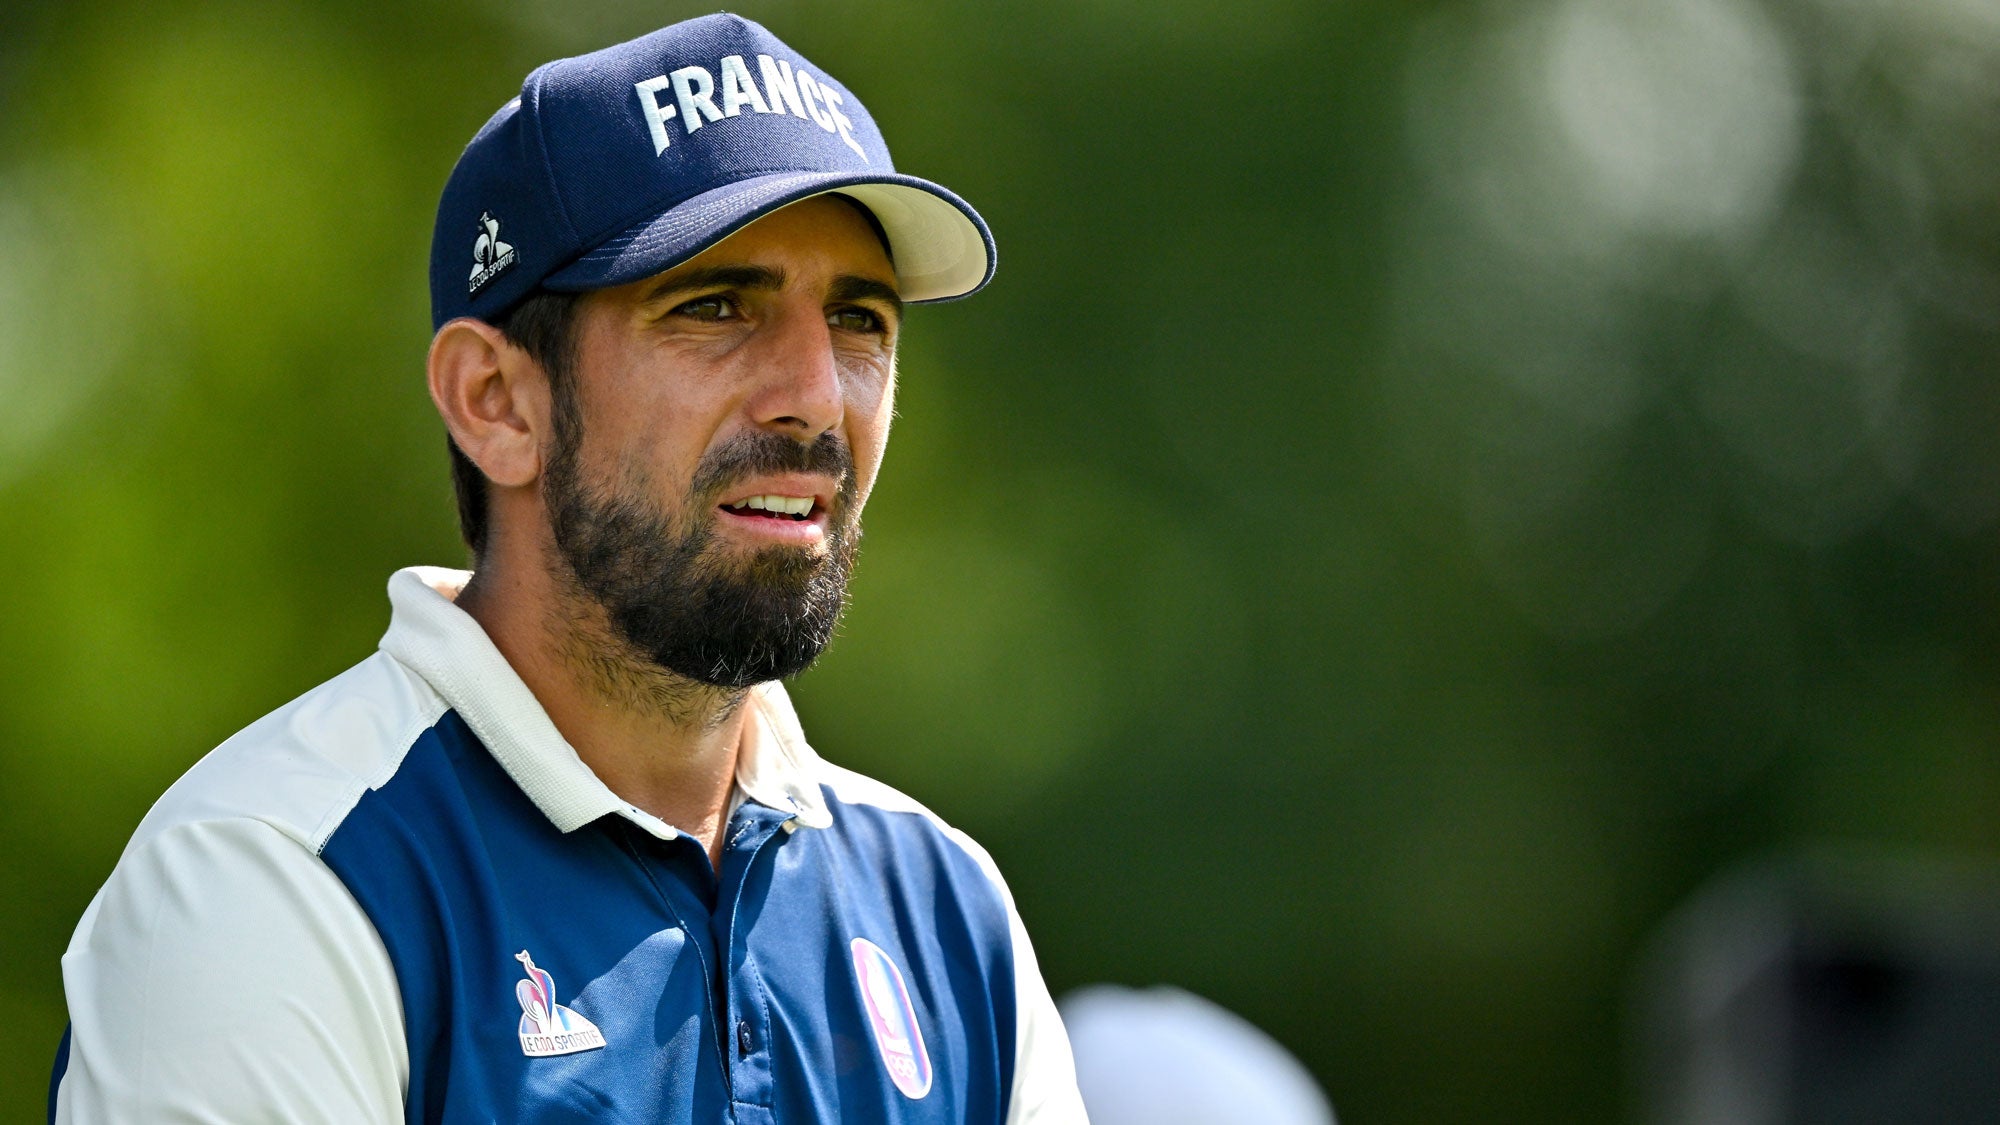 Matthieu Pavon of Team France during round 1 of the men's golf singles at Le Golf National during the 2024 Paris Summer Olympic Games in Paris, France.